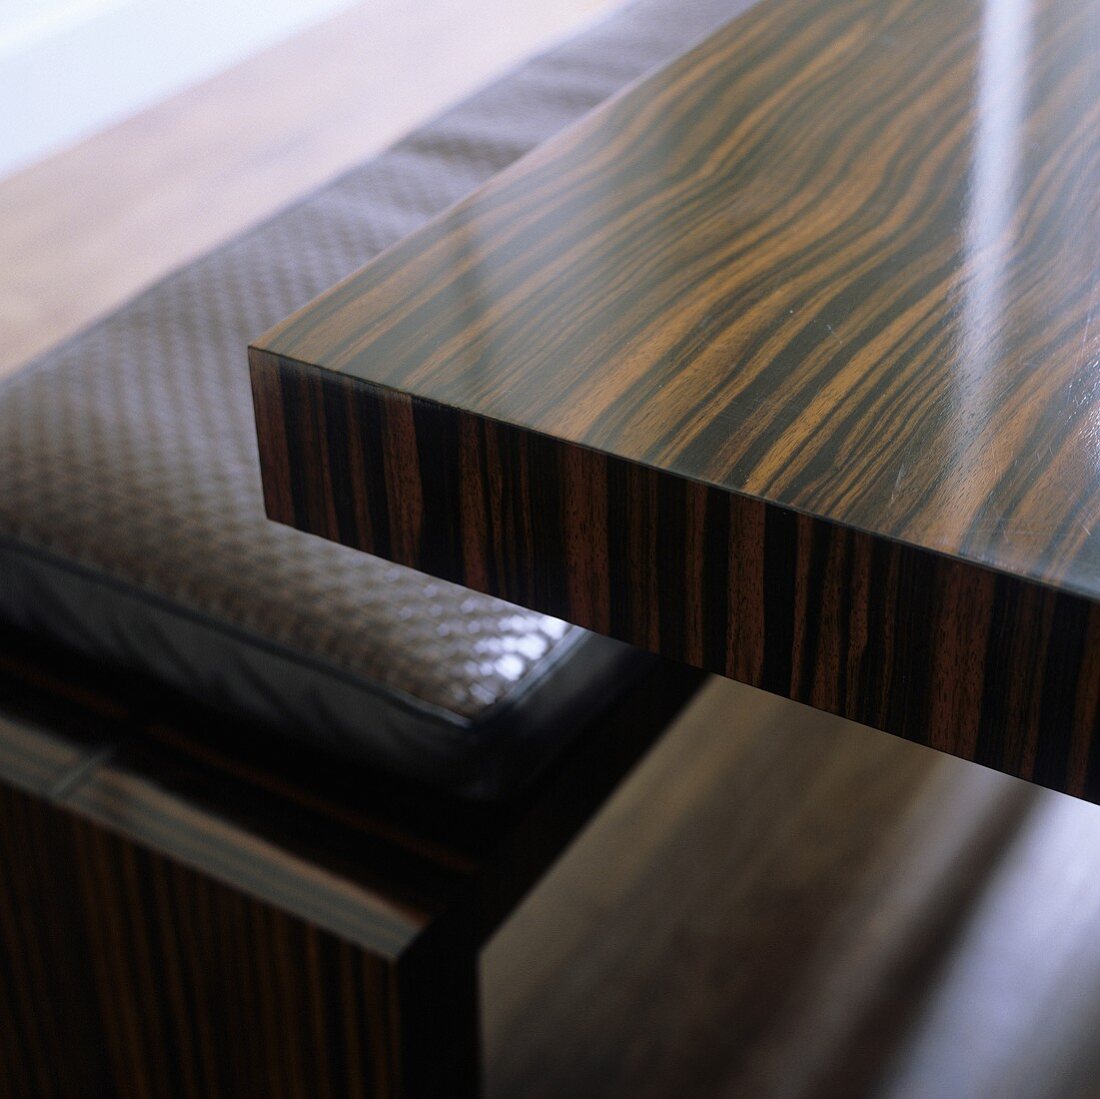 A veneered table made of tropical wood and a bench upholstered in leather